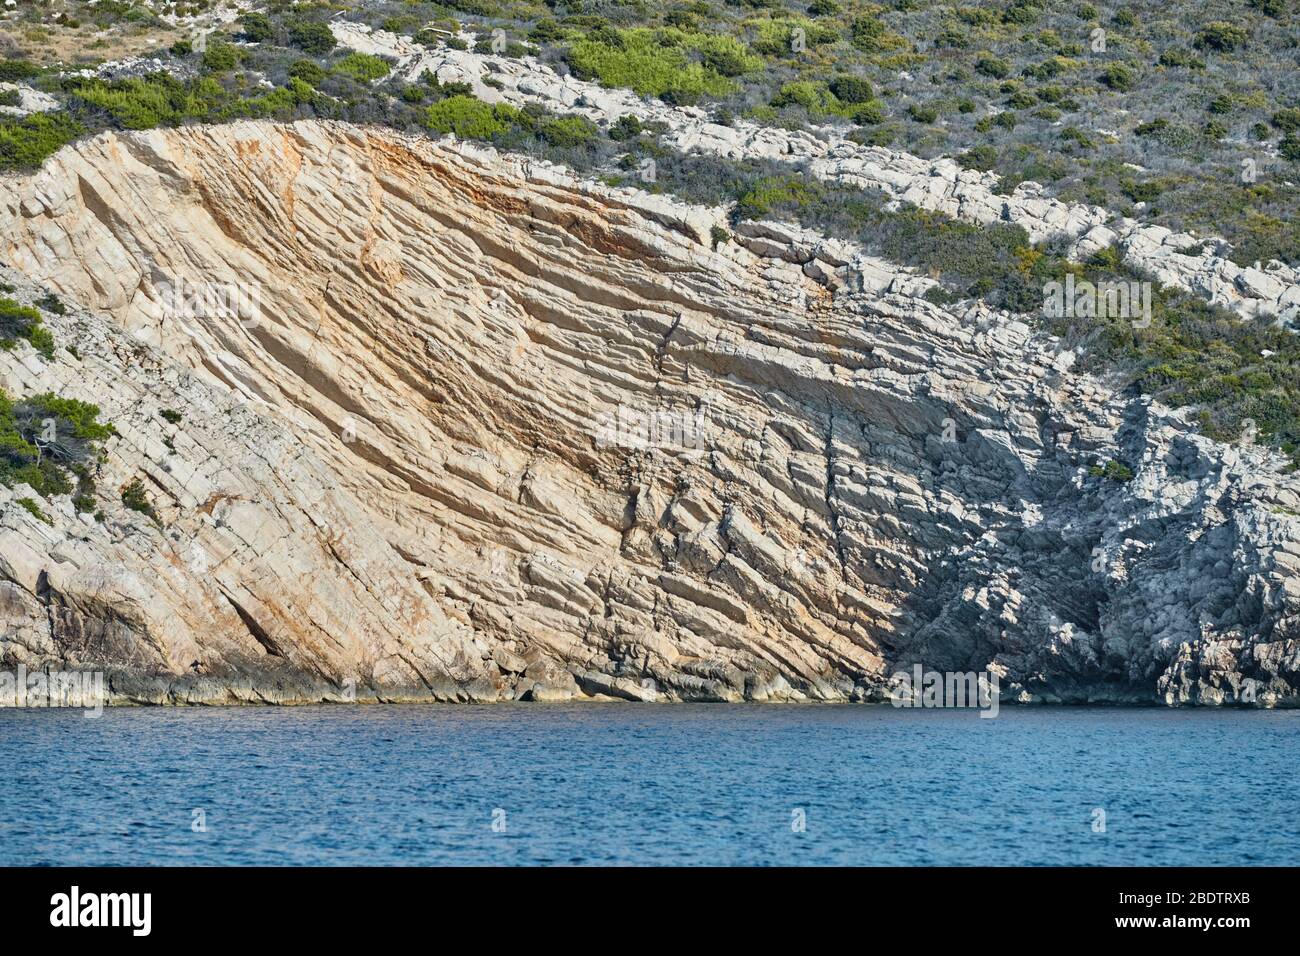 Beautiful high cliff with caves and hanging rocks of a mountain in Adriatic sea, a crevice, colorful Stock Photo